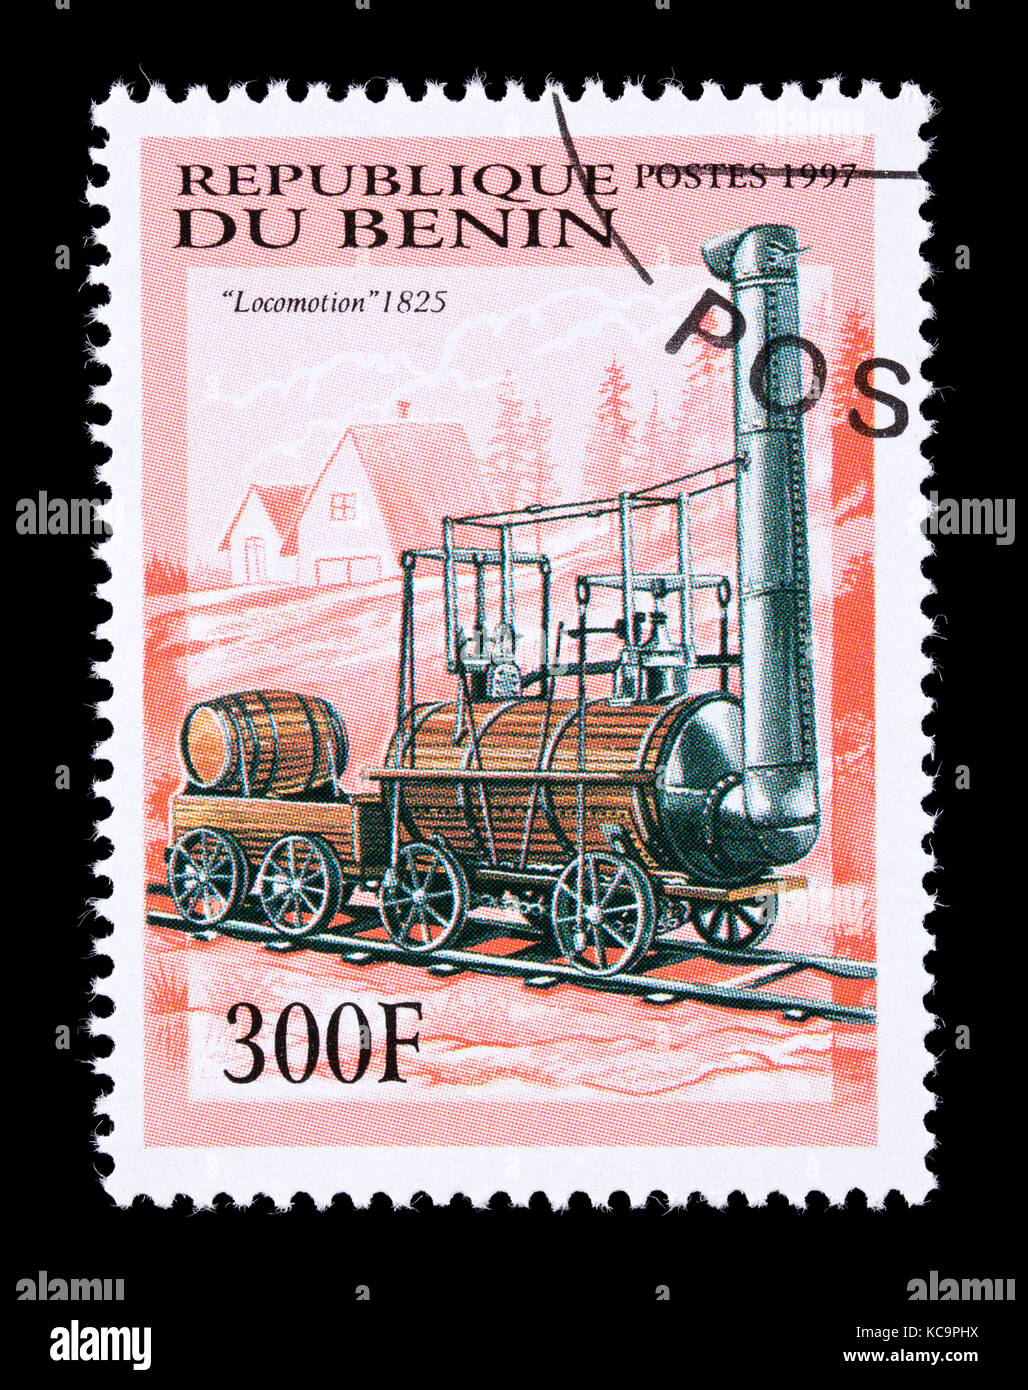 Postage stamp from Benin depicting the steam engine Locomotion from 1825. Stock Photo